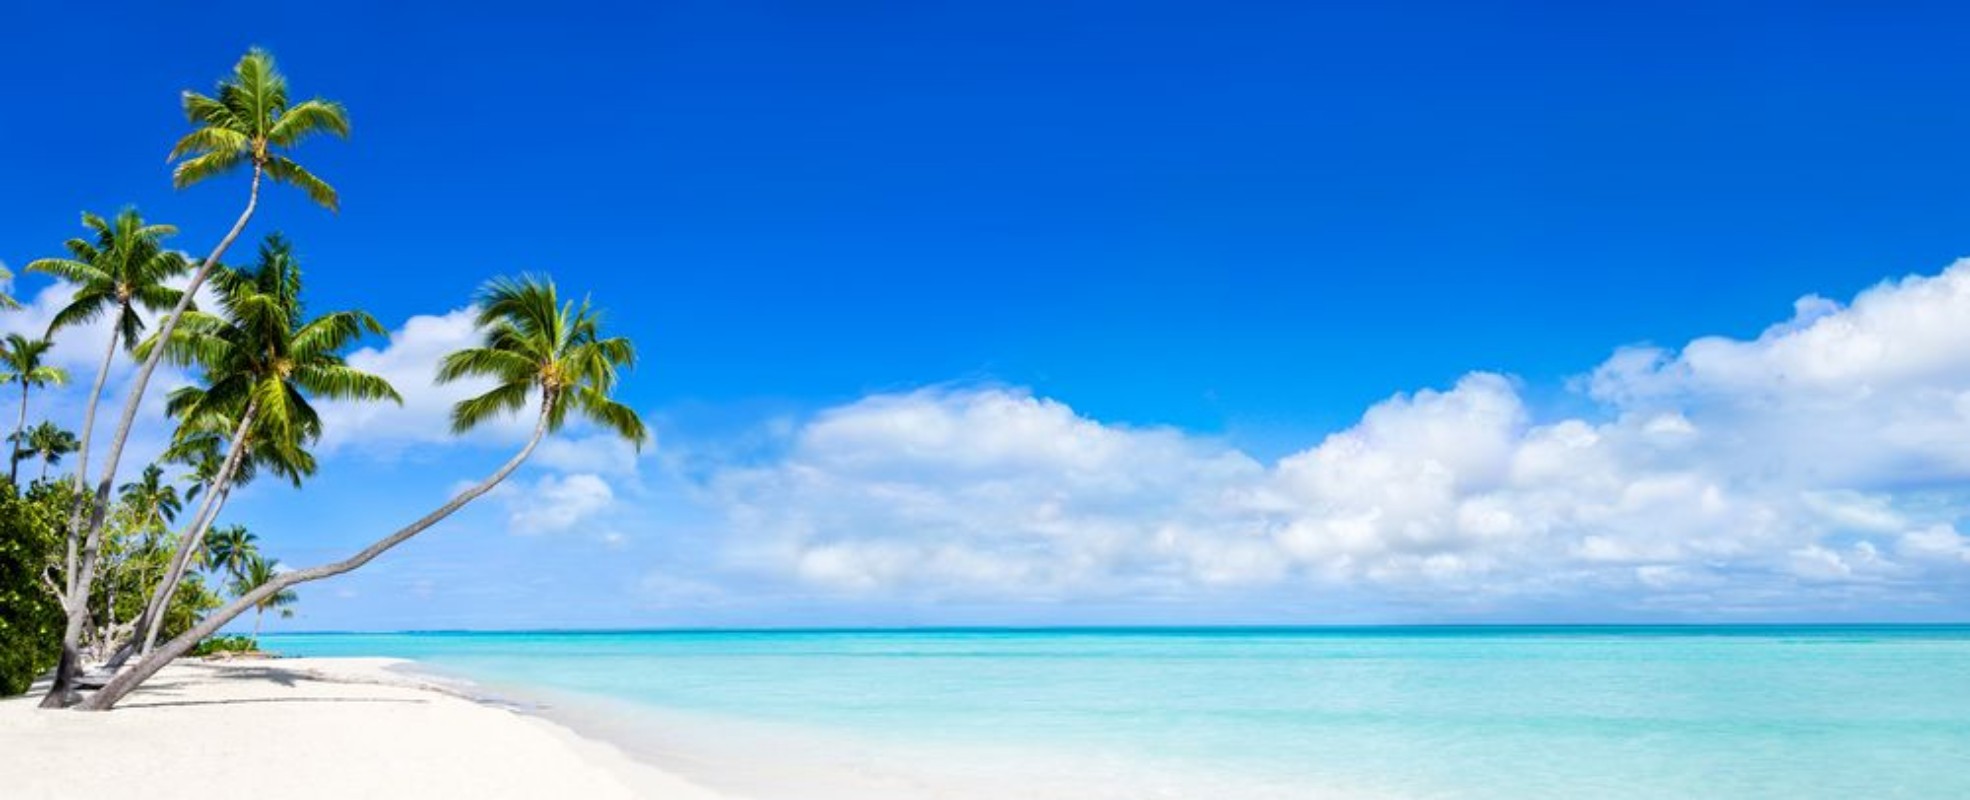 Picture of Beach Panorama with blue water and palm trees